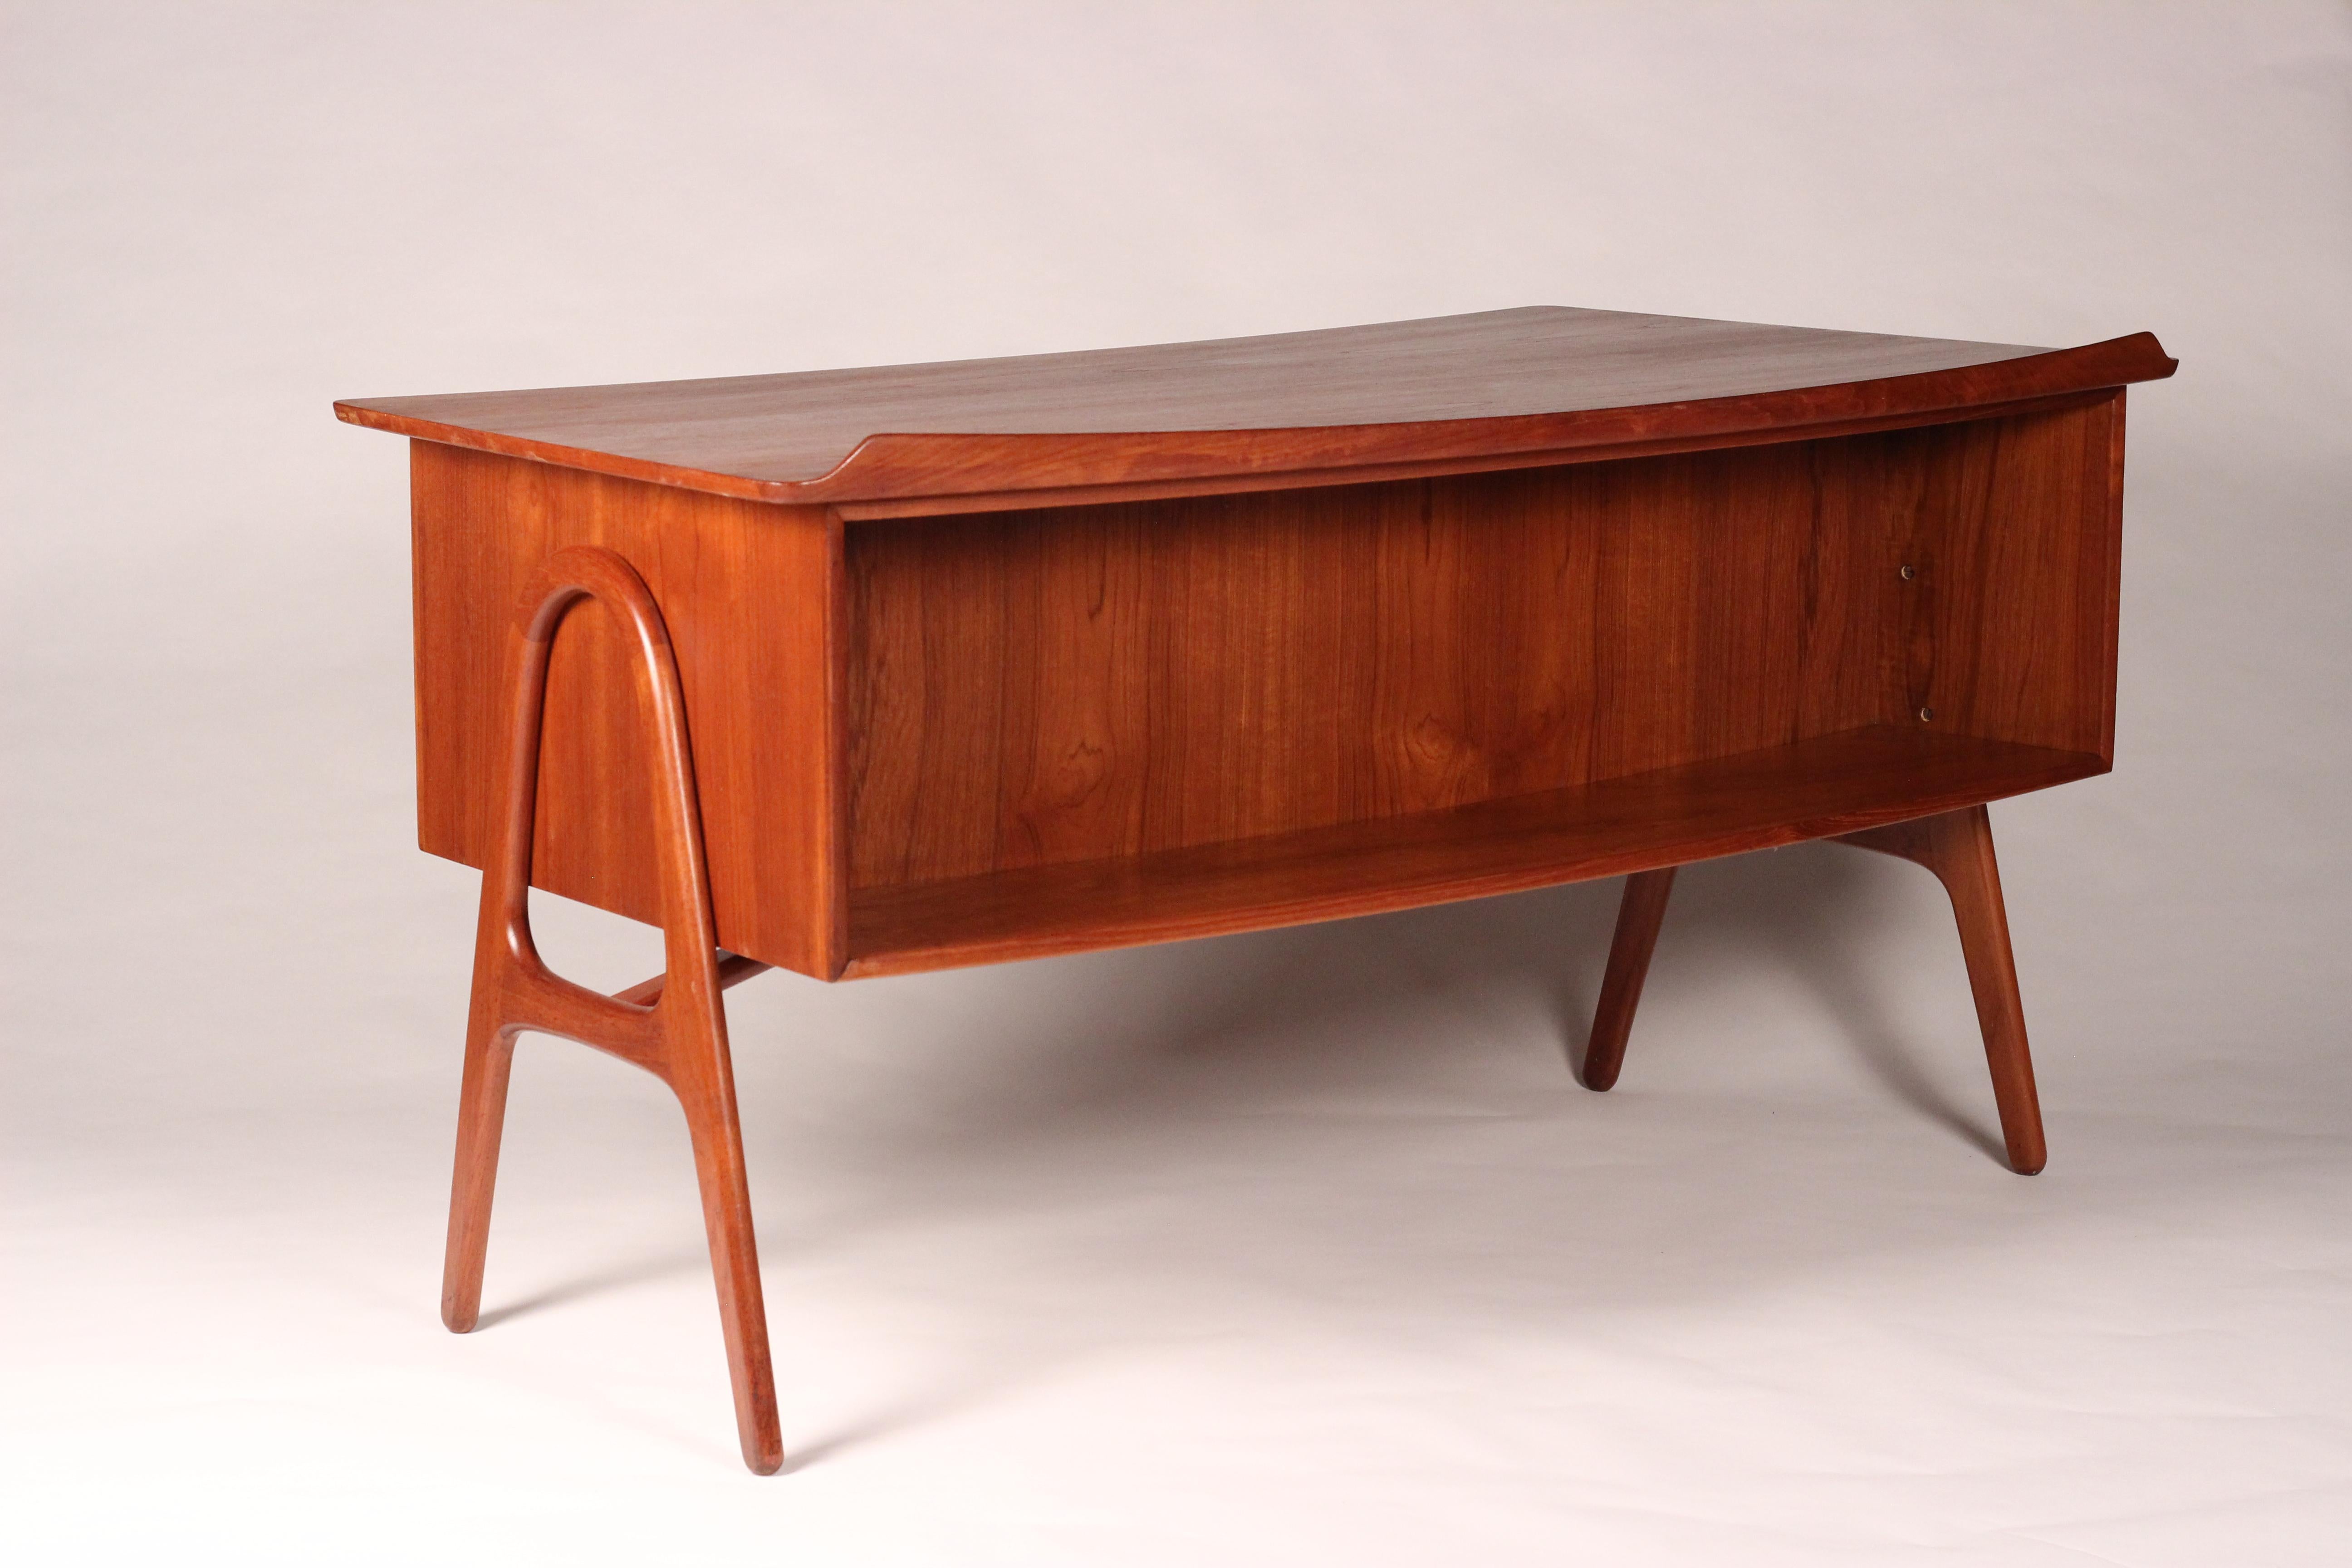 Mid-Century Modern Danish teak desk Designed by Svend Aage Madsen, Svend Aage Madsen, was a well renowned architect who designed this ergonomically beautiful desk made from Teak.
This desk, model number SH 180, was made by Sigurd Hansen Møbelfabrik